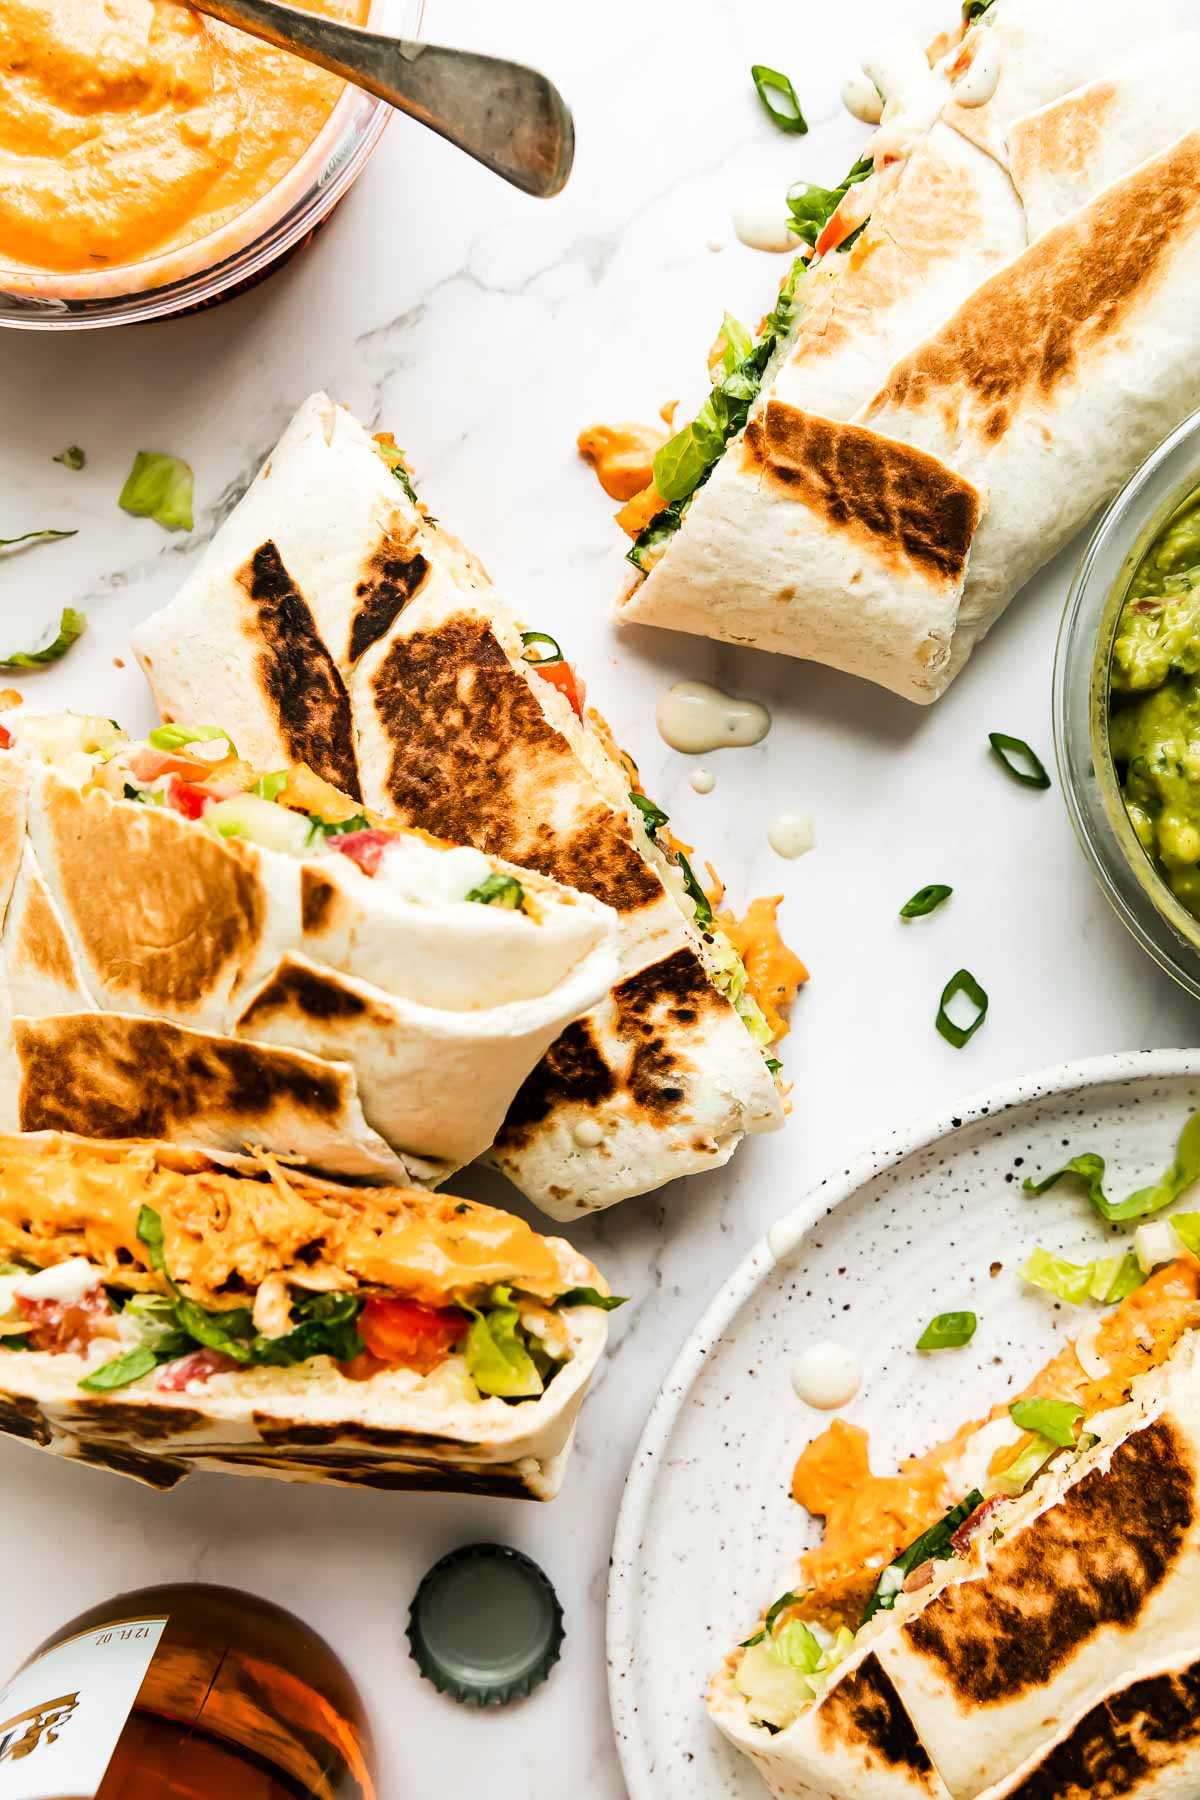 Five buffalo chicken crunchwraps are arranged atop a white and gray marble surface. An open container of Good Foods Plant Based Buffalo Dip, a second open container of Good Foods Chunky Guacamole, and a bottle of beer rest alongside the crunchwraps.